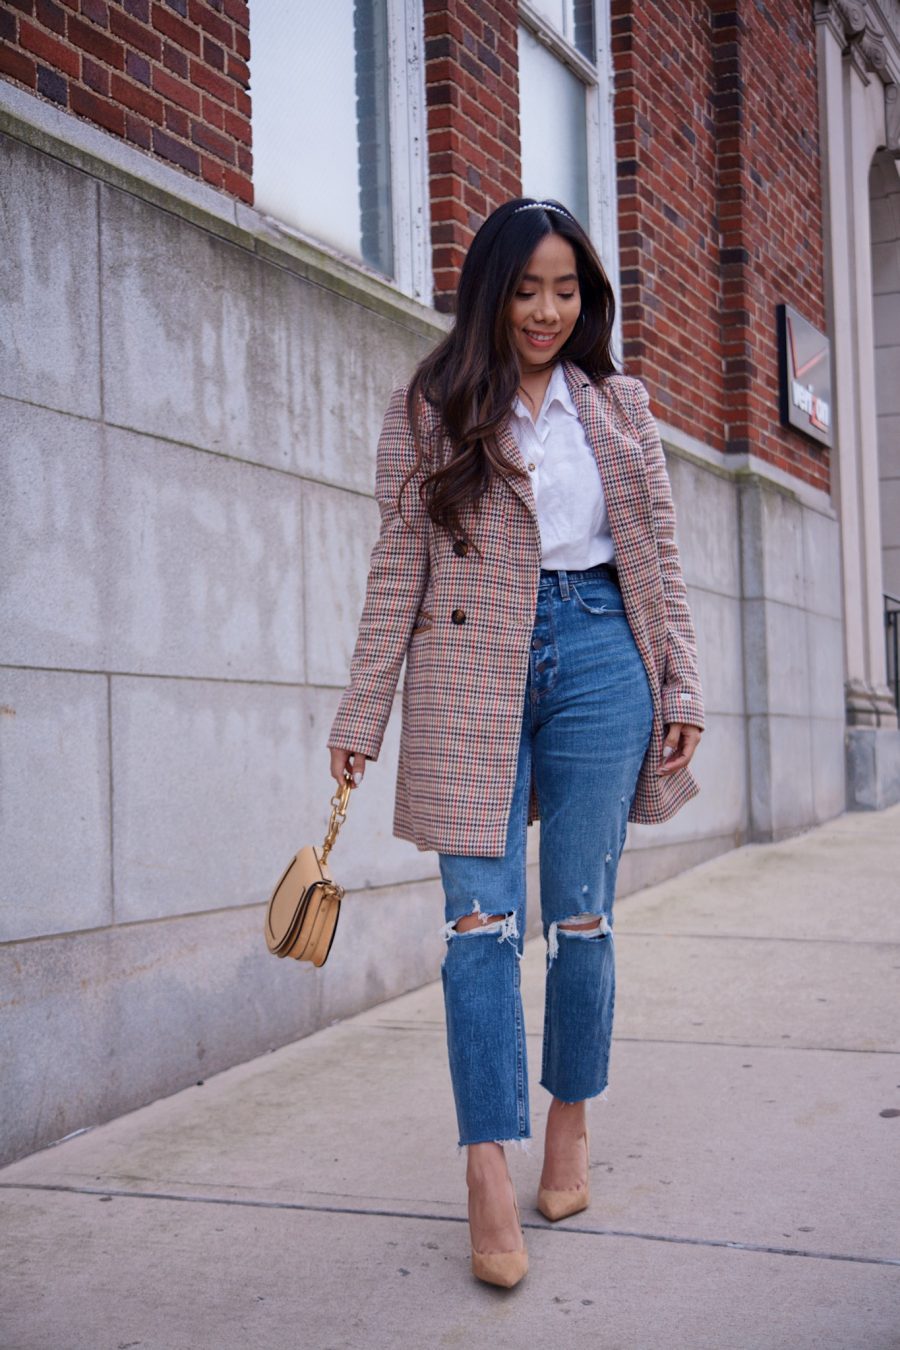 Plaid trench coat casual dressy blog post fashion how to style blogger best 2020 2019 top best USA blog 2